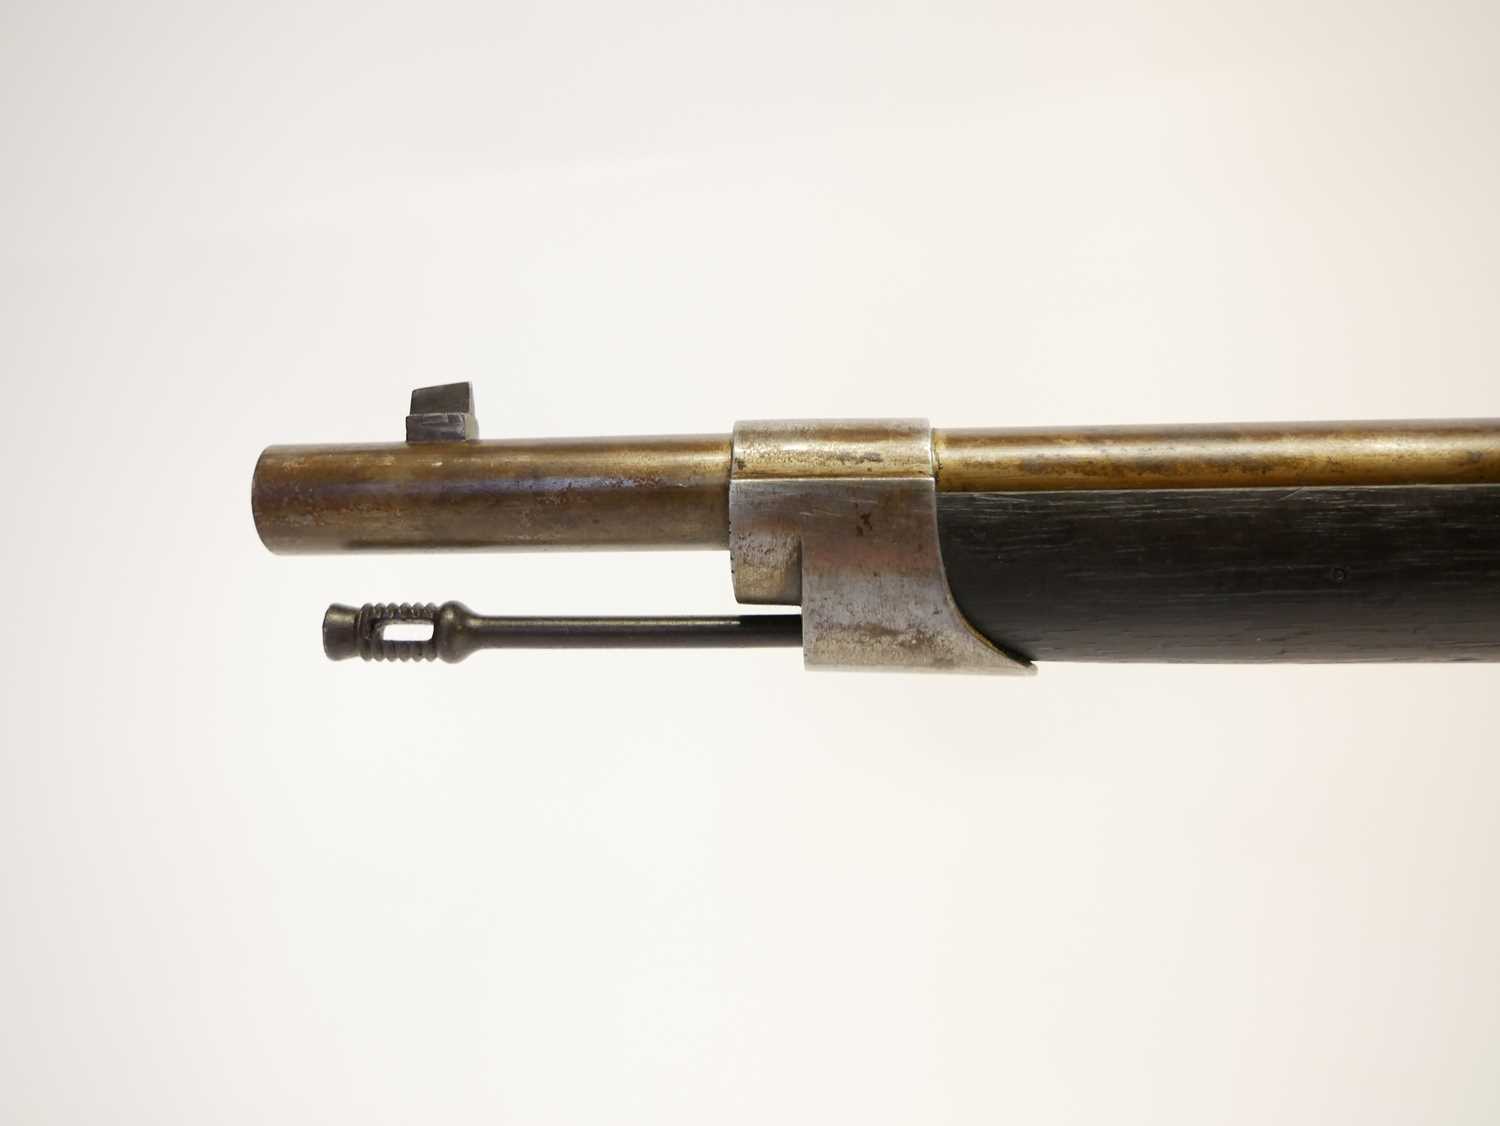 Dutch Beaumont-Vitali 1871/88 11mm bolt action rifle, serial number 46, 32inch barrel with tangent - Image 14 of 14